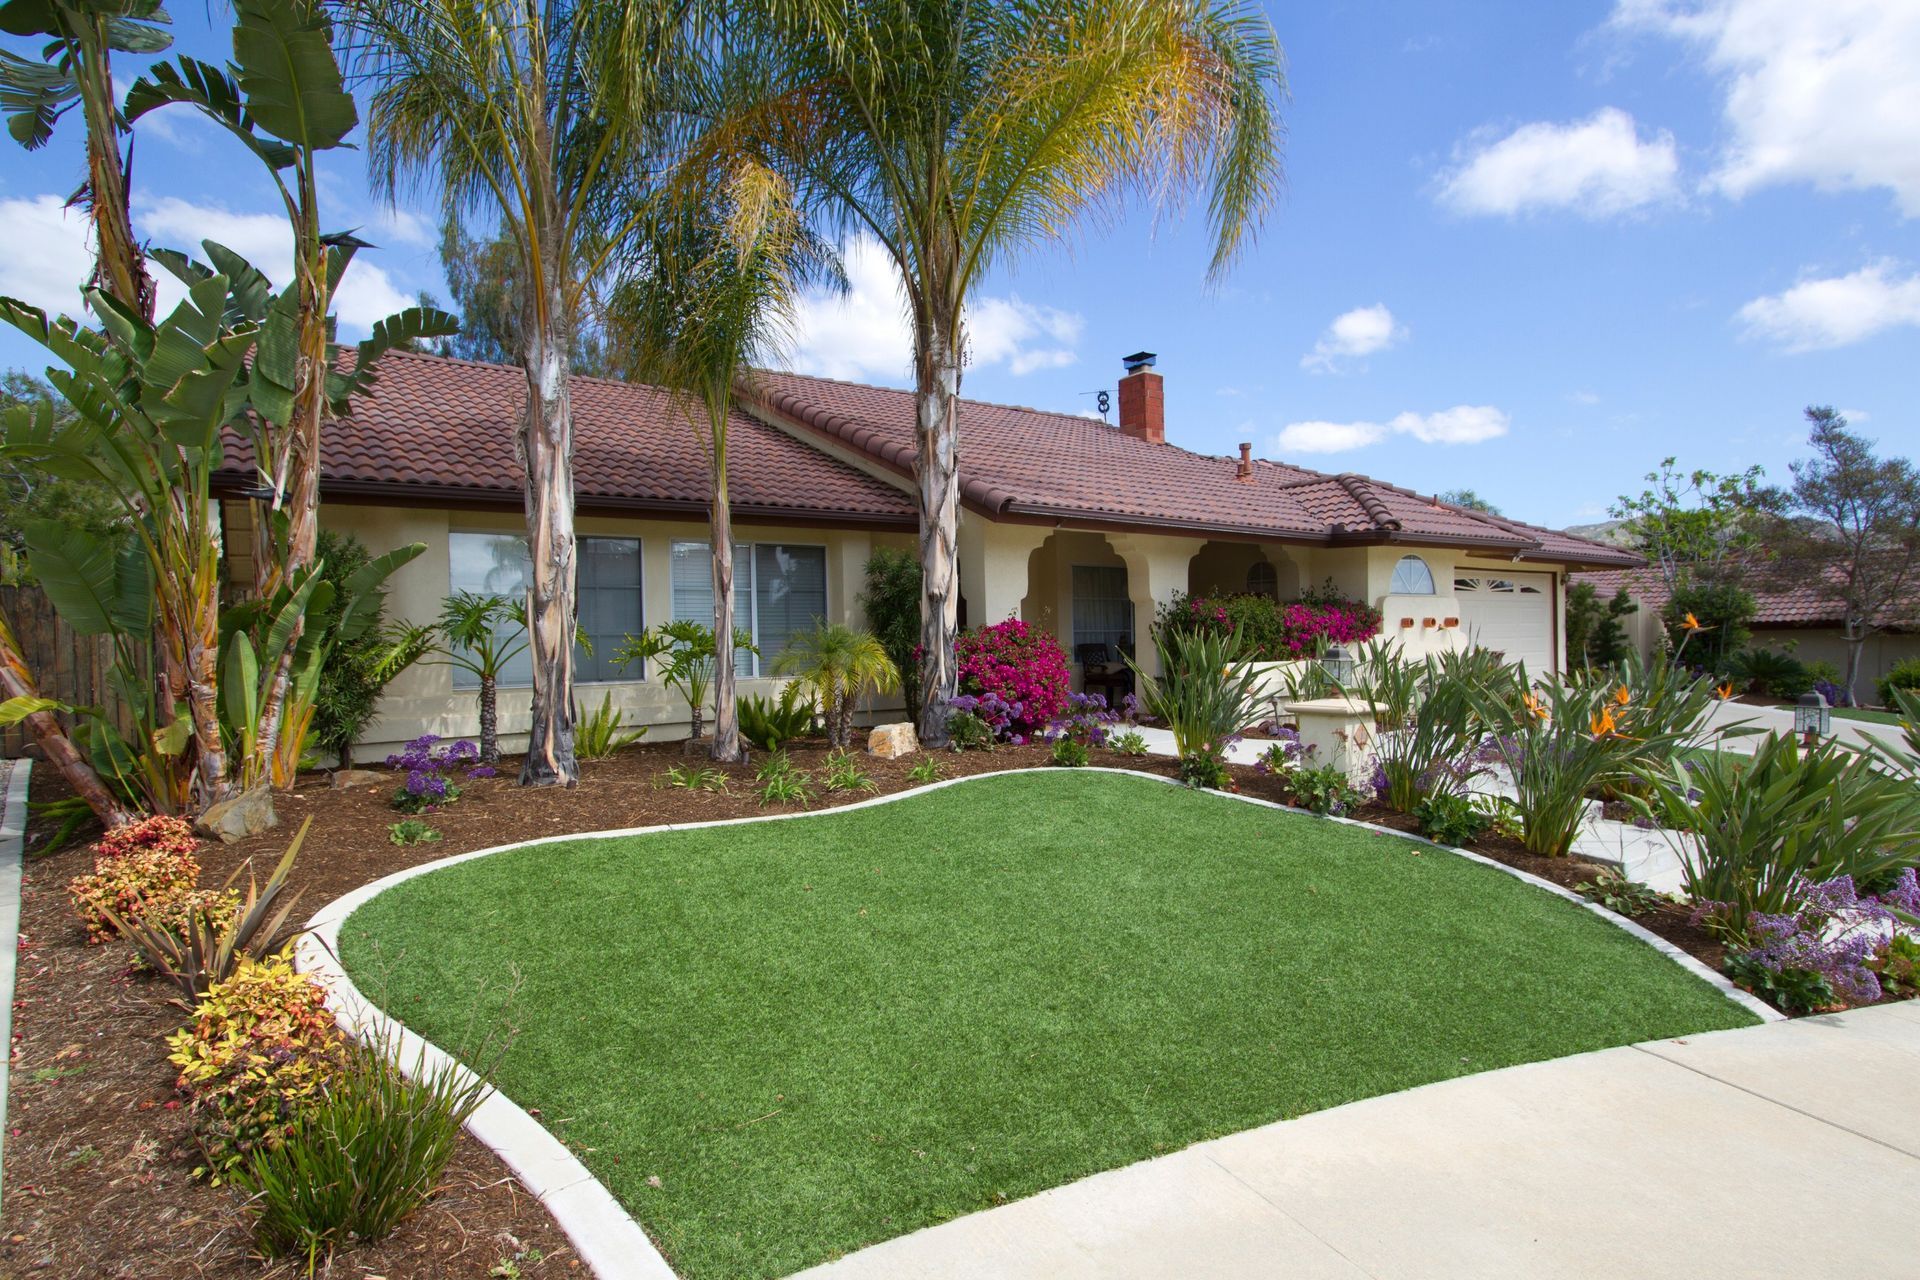 artificial turf and pavers front yard in Phoenix, AZ